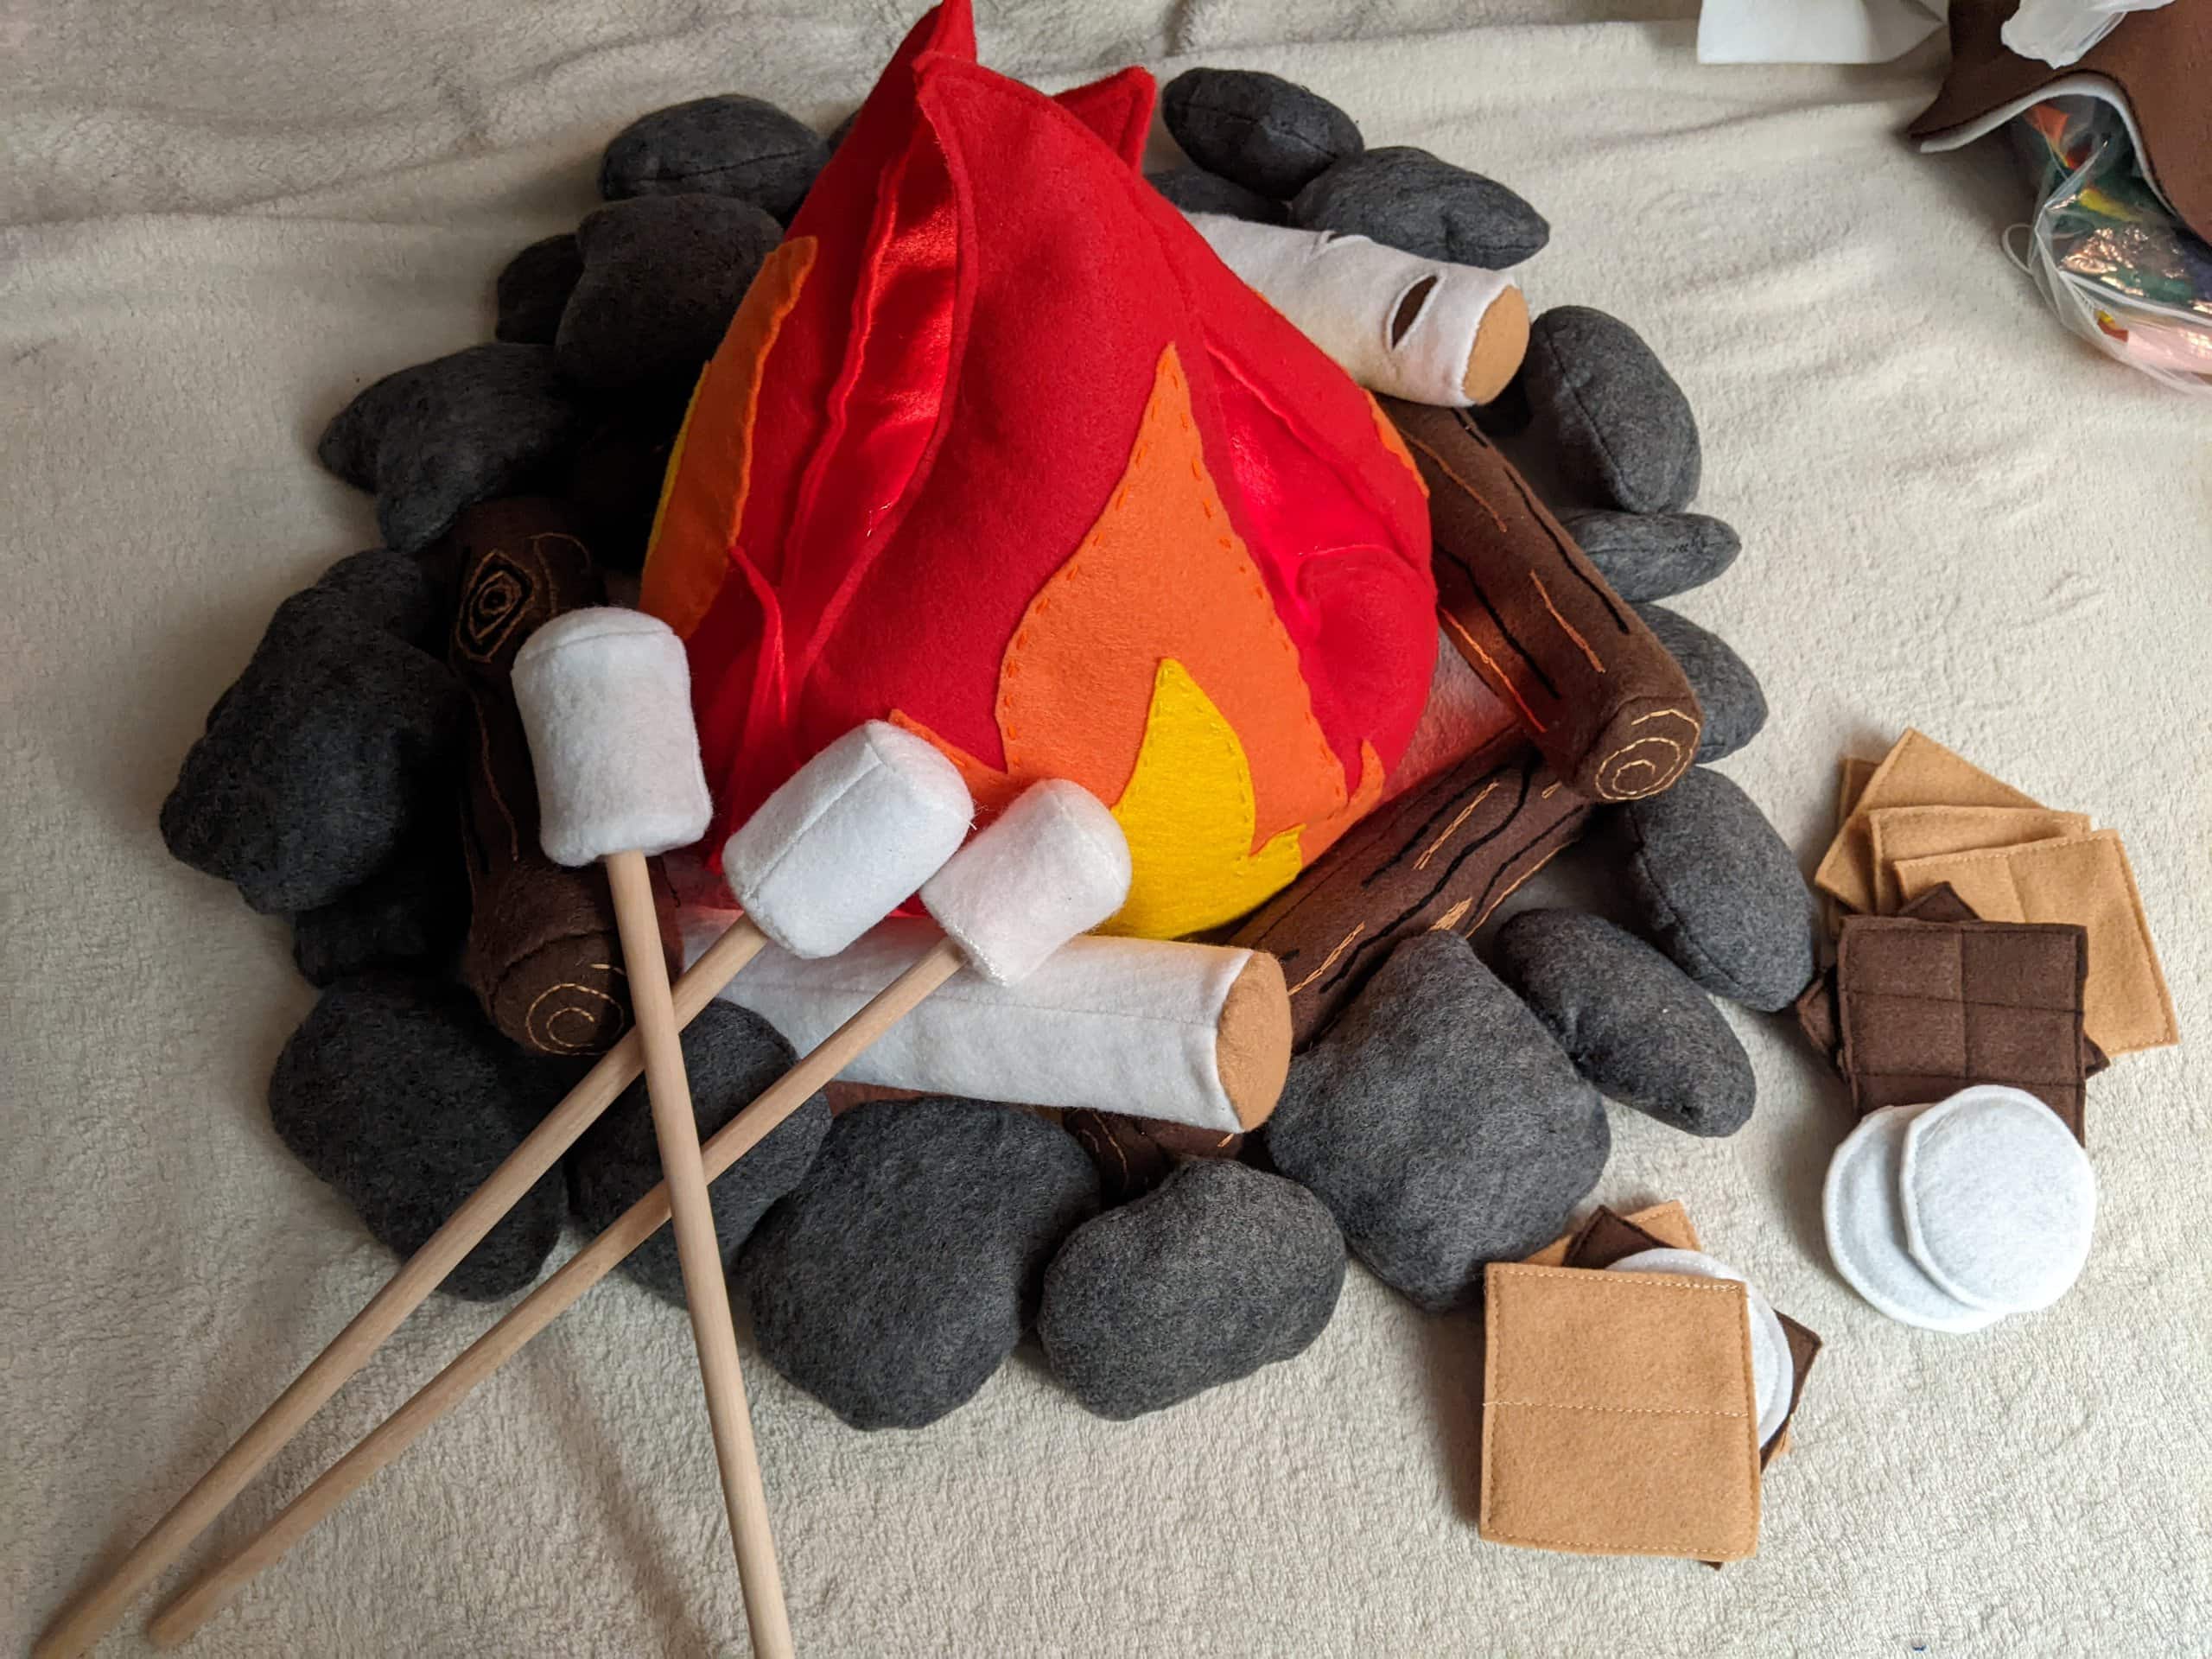 The fire from our handmade fort kit